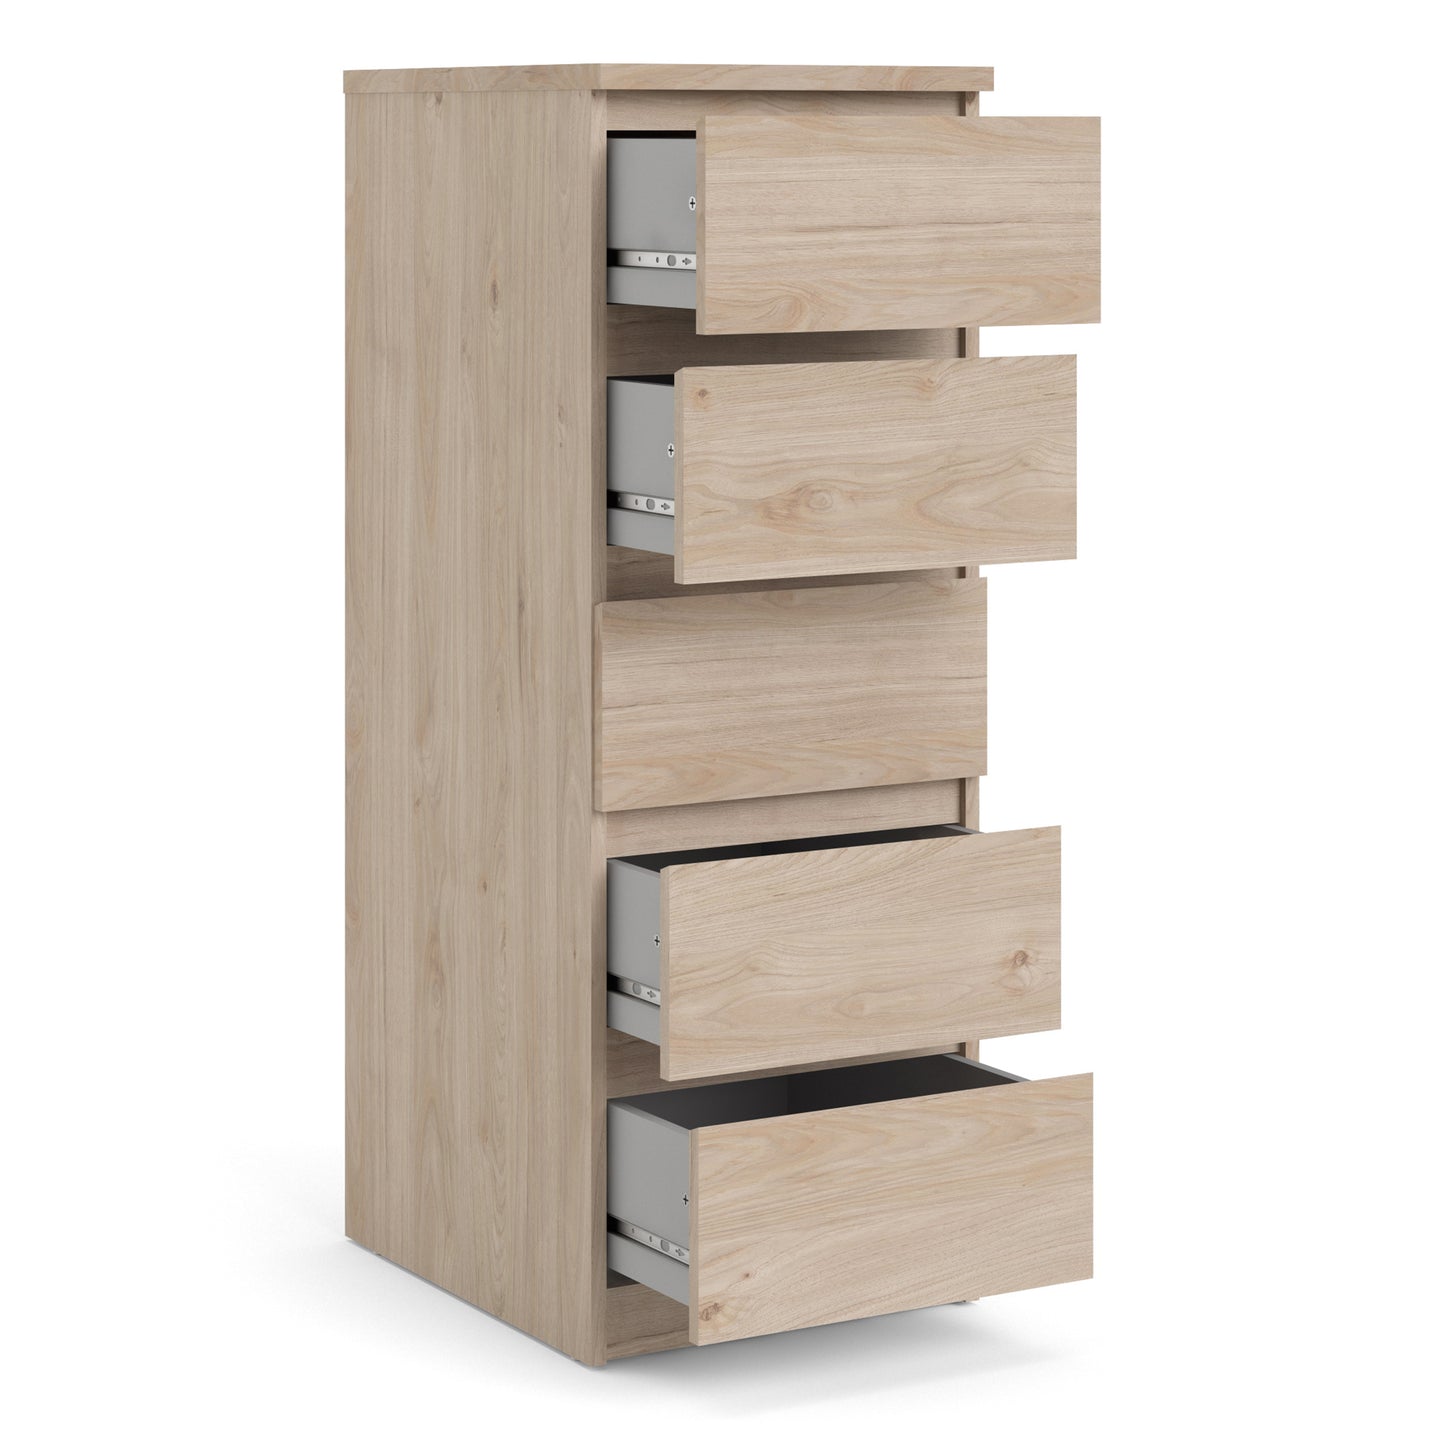 Naia  Narrow Chest of 5 Drawers in Jackson Hickory Oak